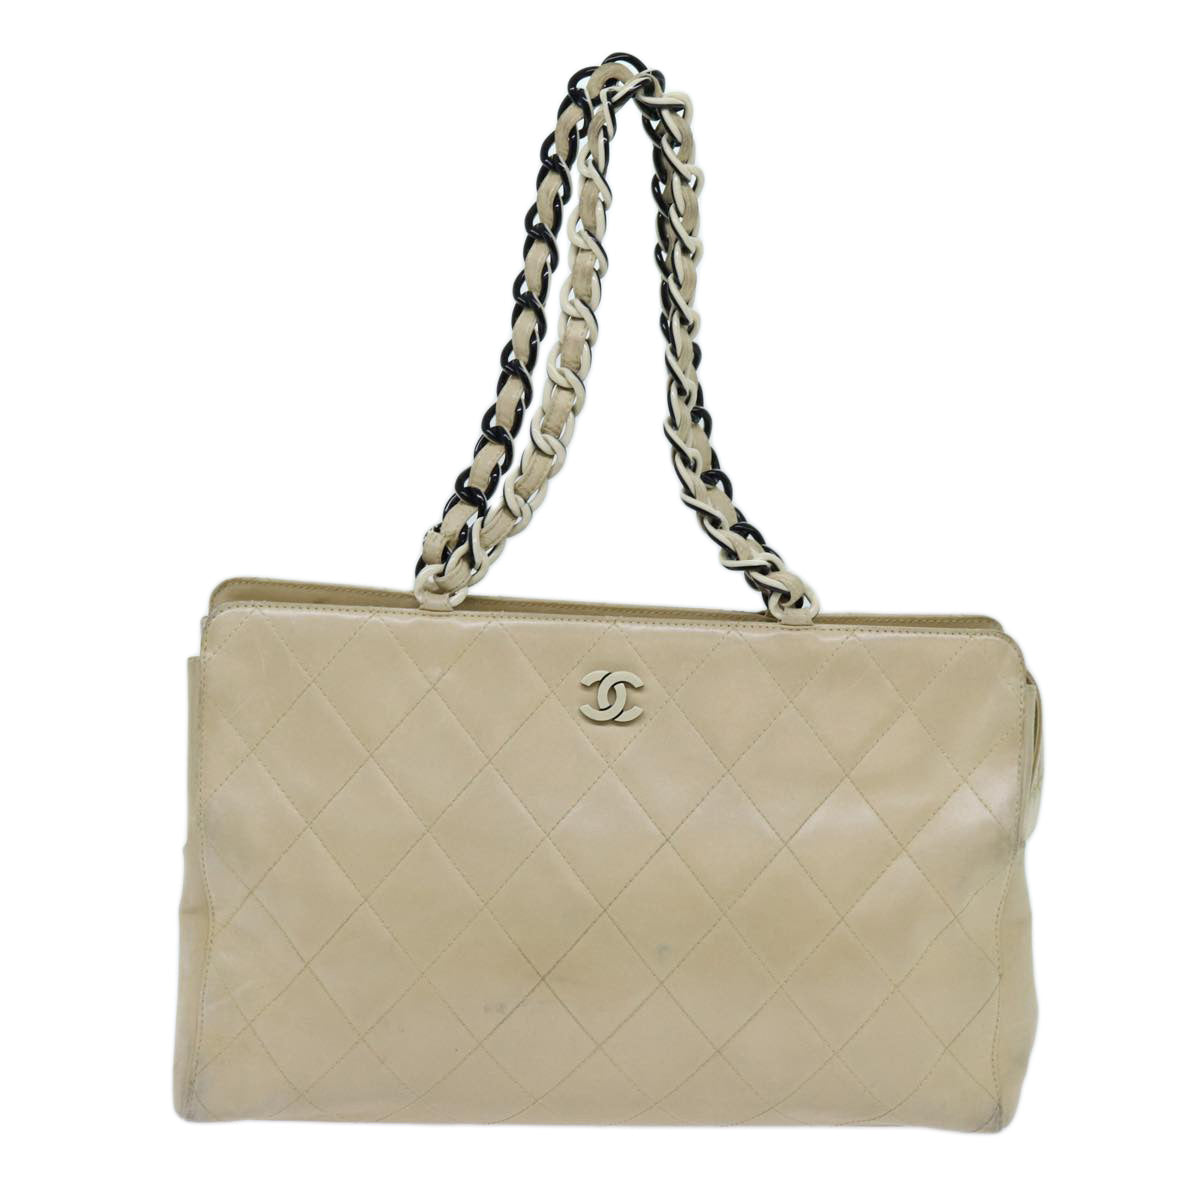 CHANEL Matelasse Chain Tote Bag Leather Beige CC Auth yk11588